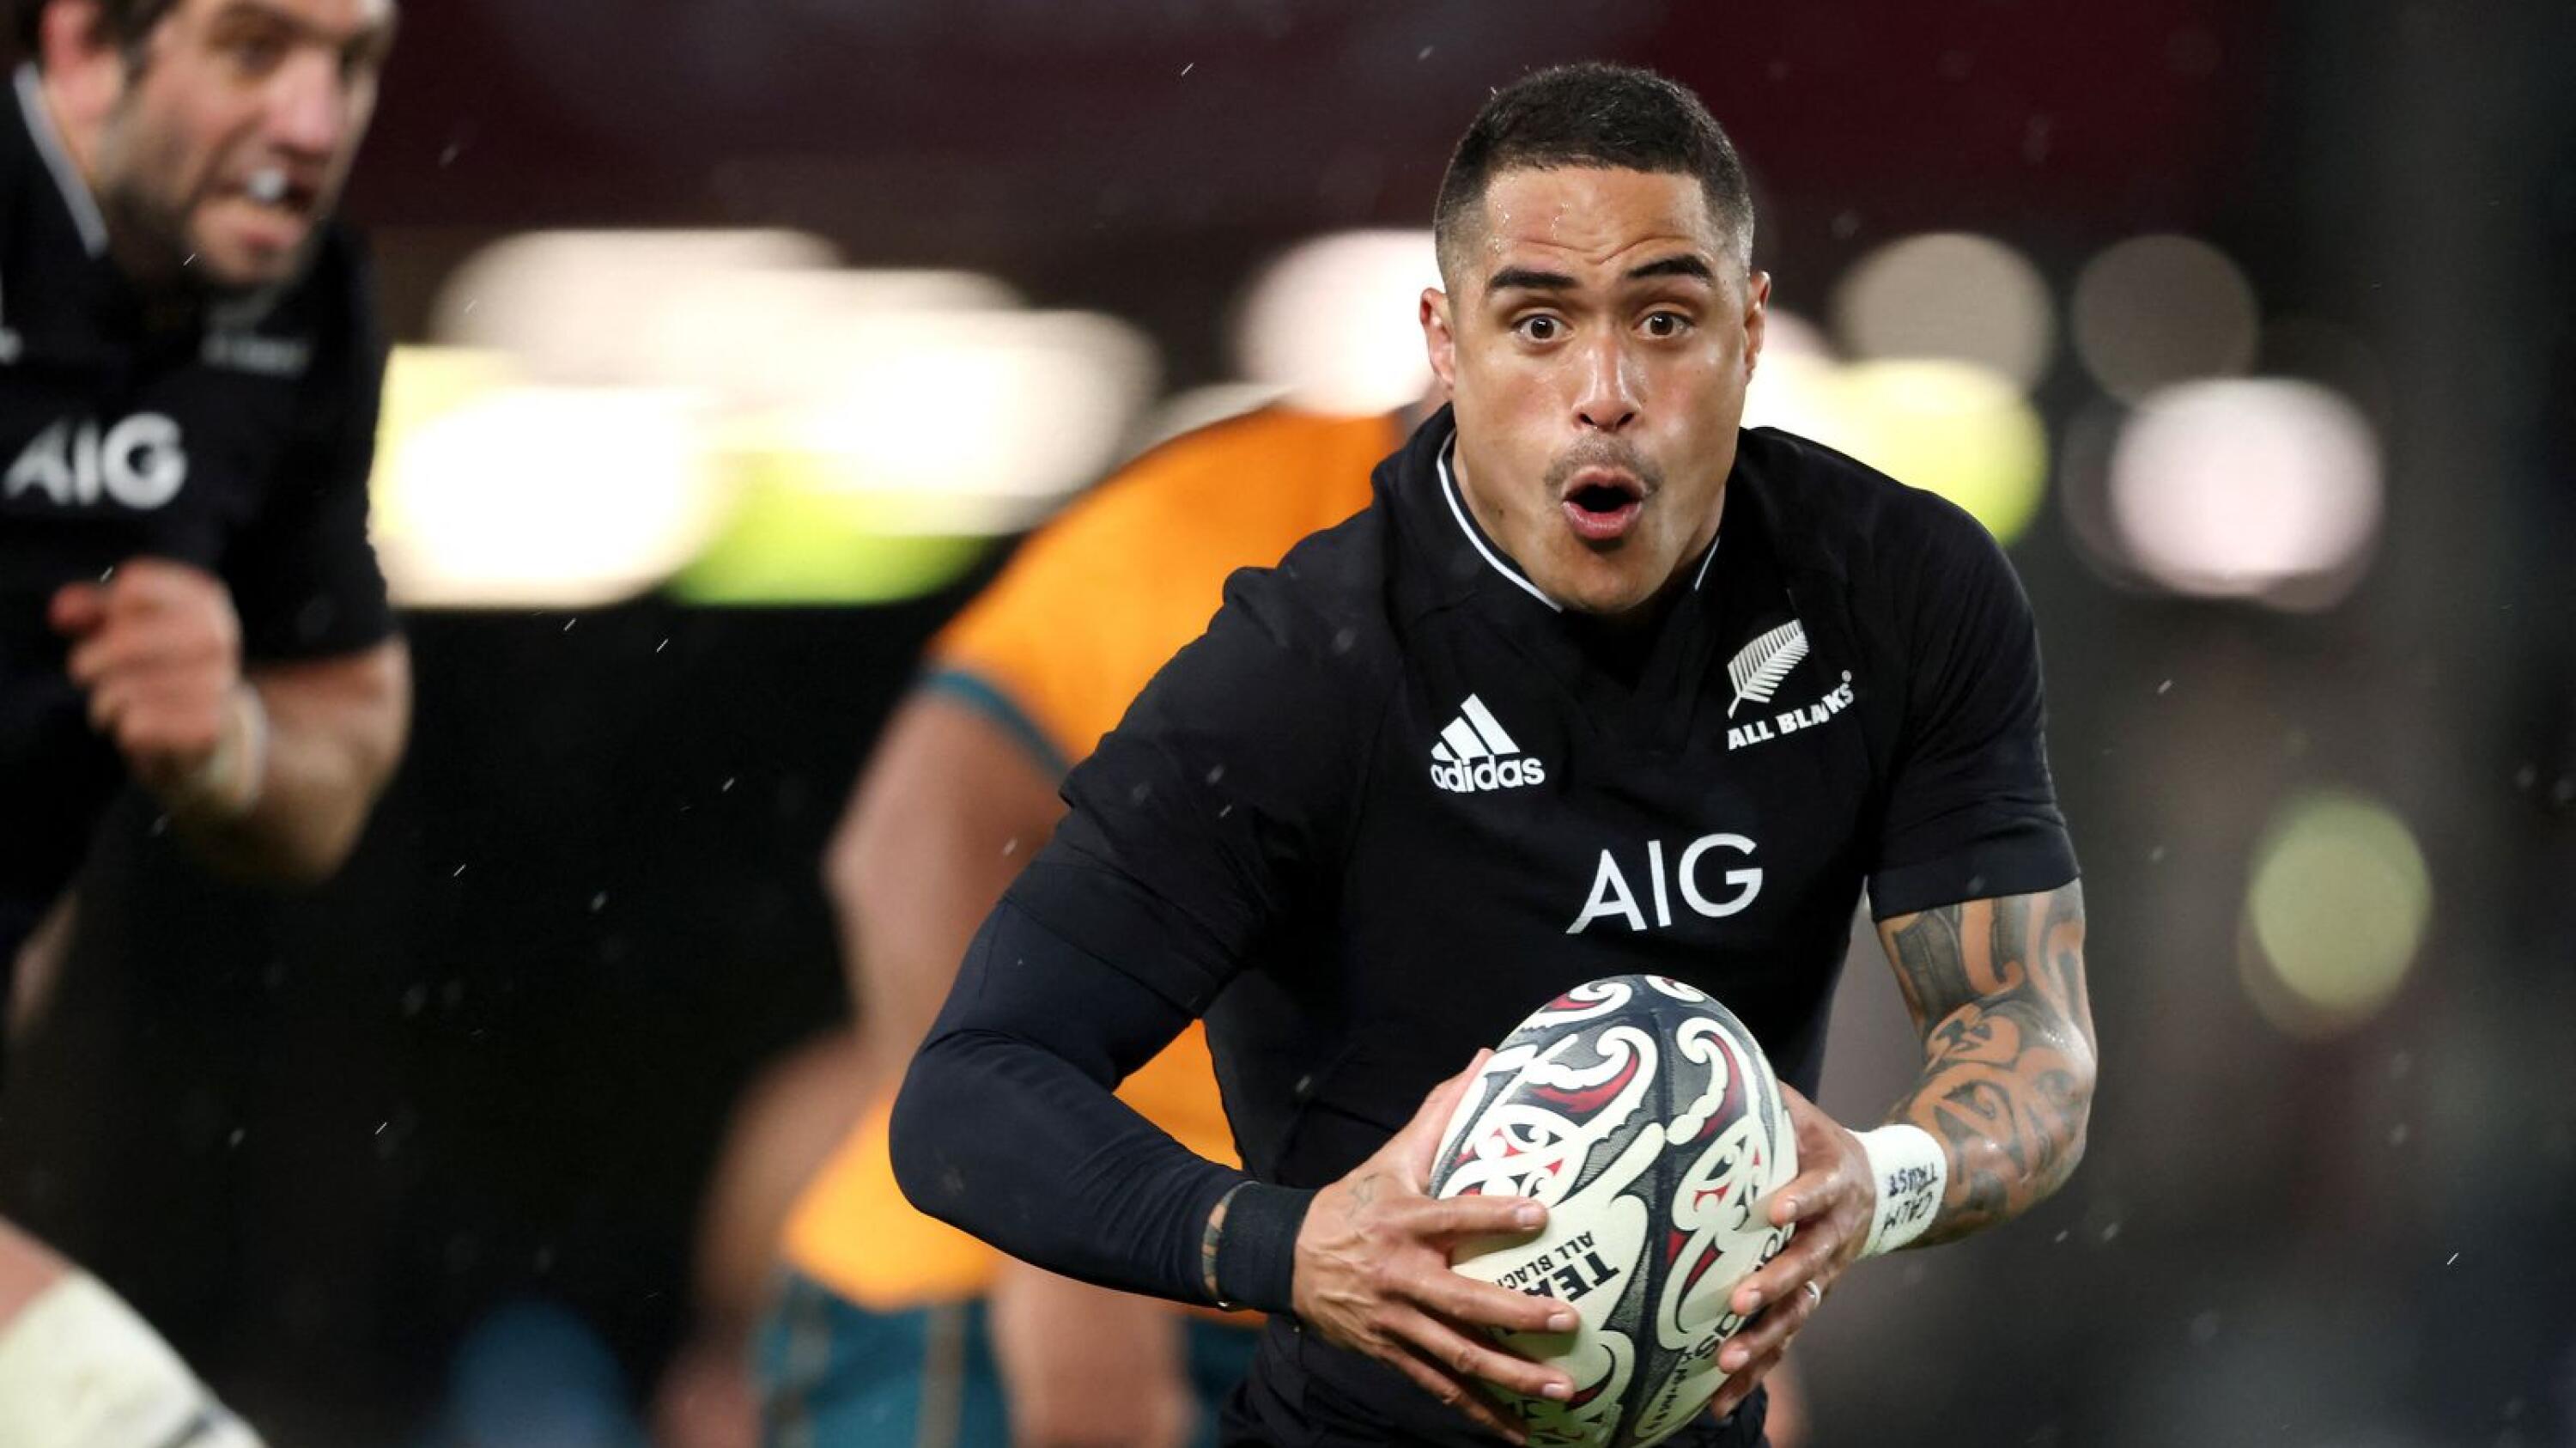 Aaron Smith of New Zealand runs with the ball during the second Bledisloe Cup rugby union match between the New Zealand and Australia at Eden Park in Auckland